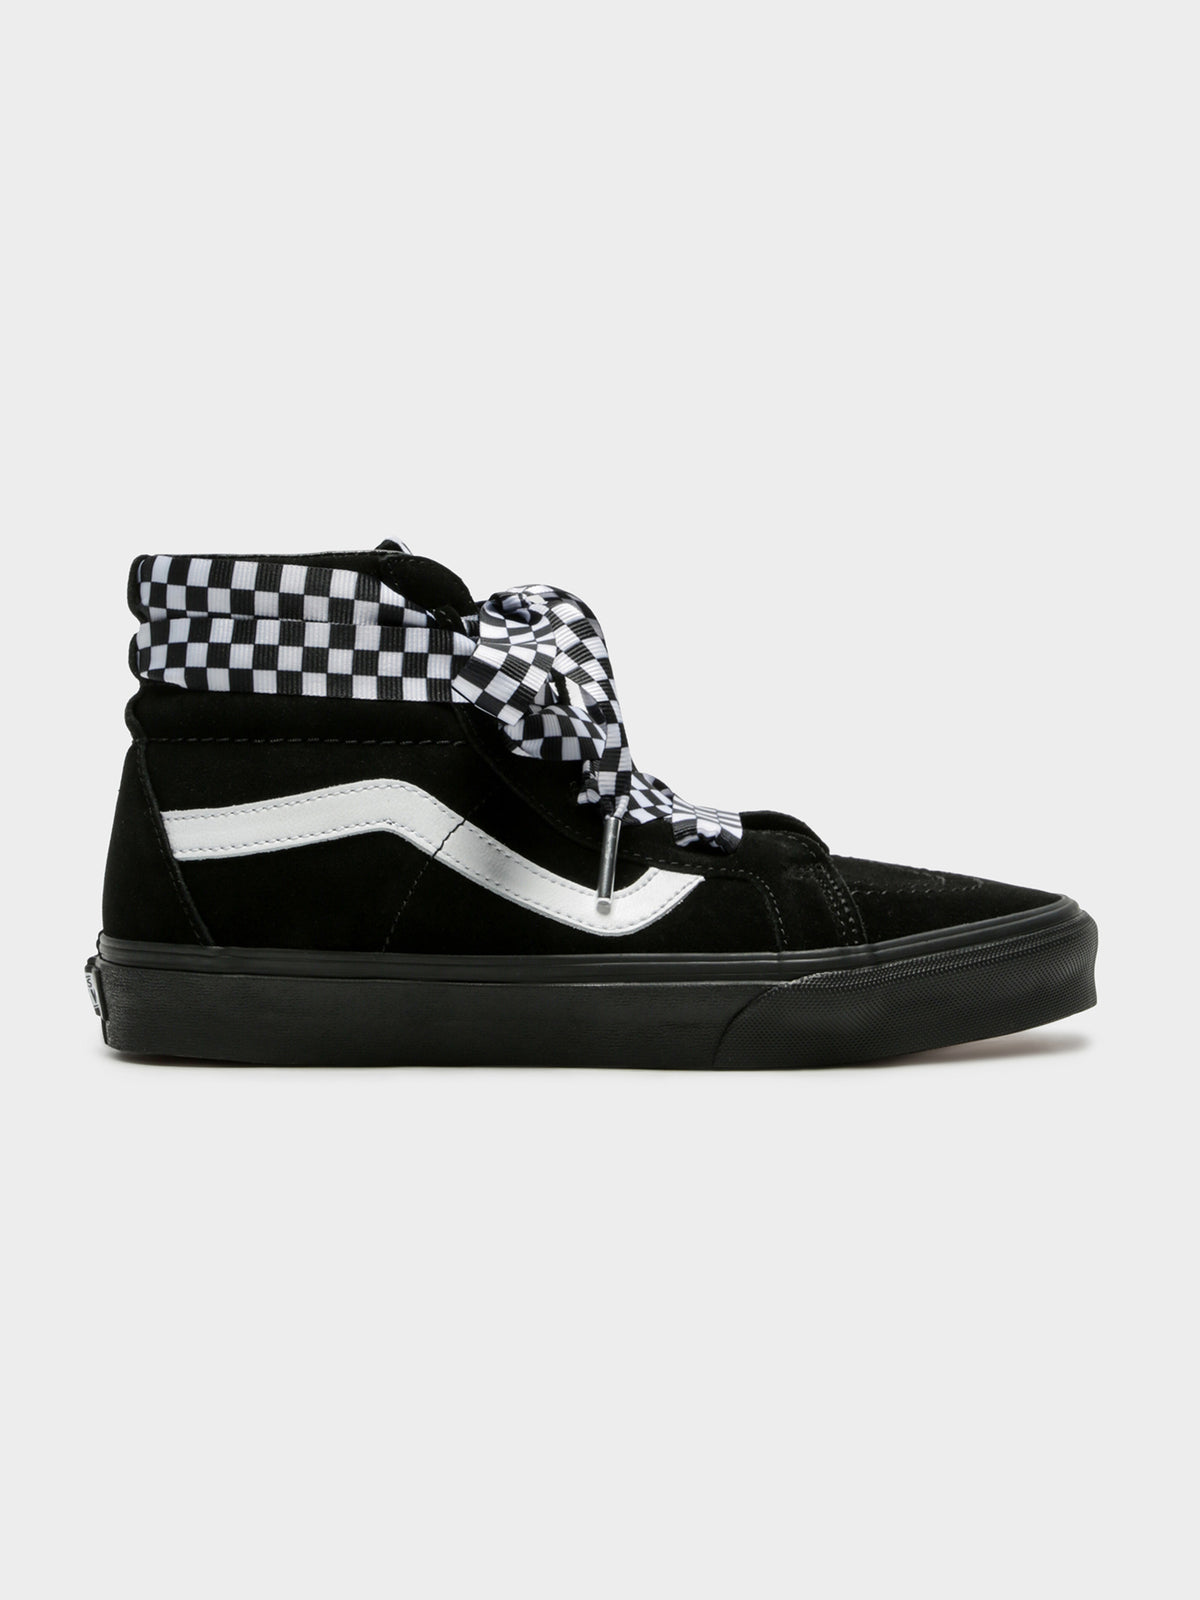 Womens SK8 Lace Check Wrap High Top Sneaker in Black